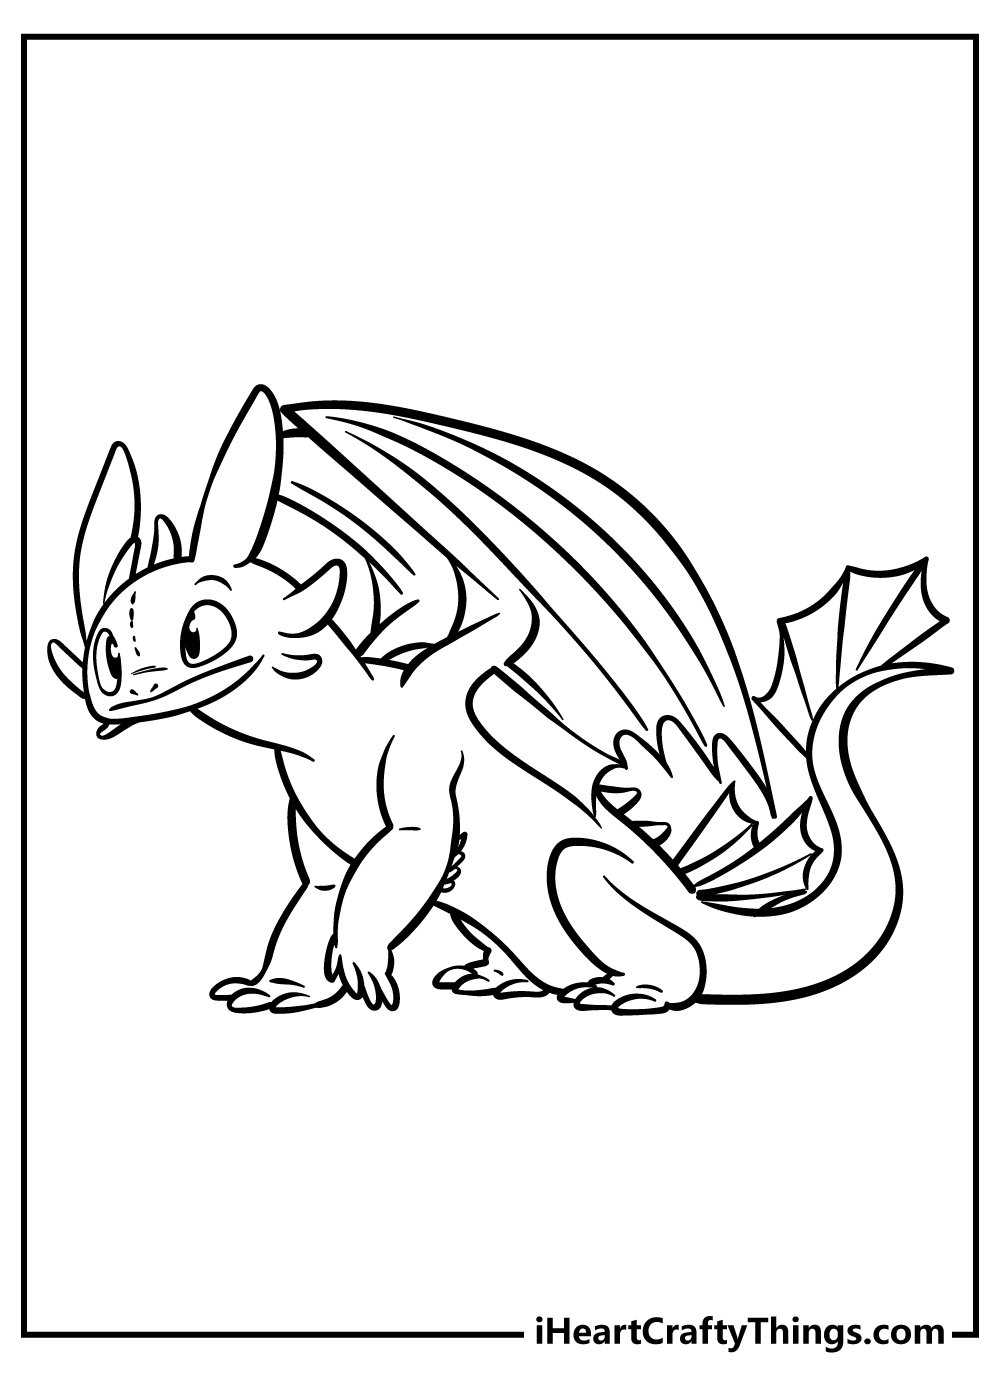 How To Train Your Dragon Coloring Pages for kids free download